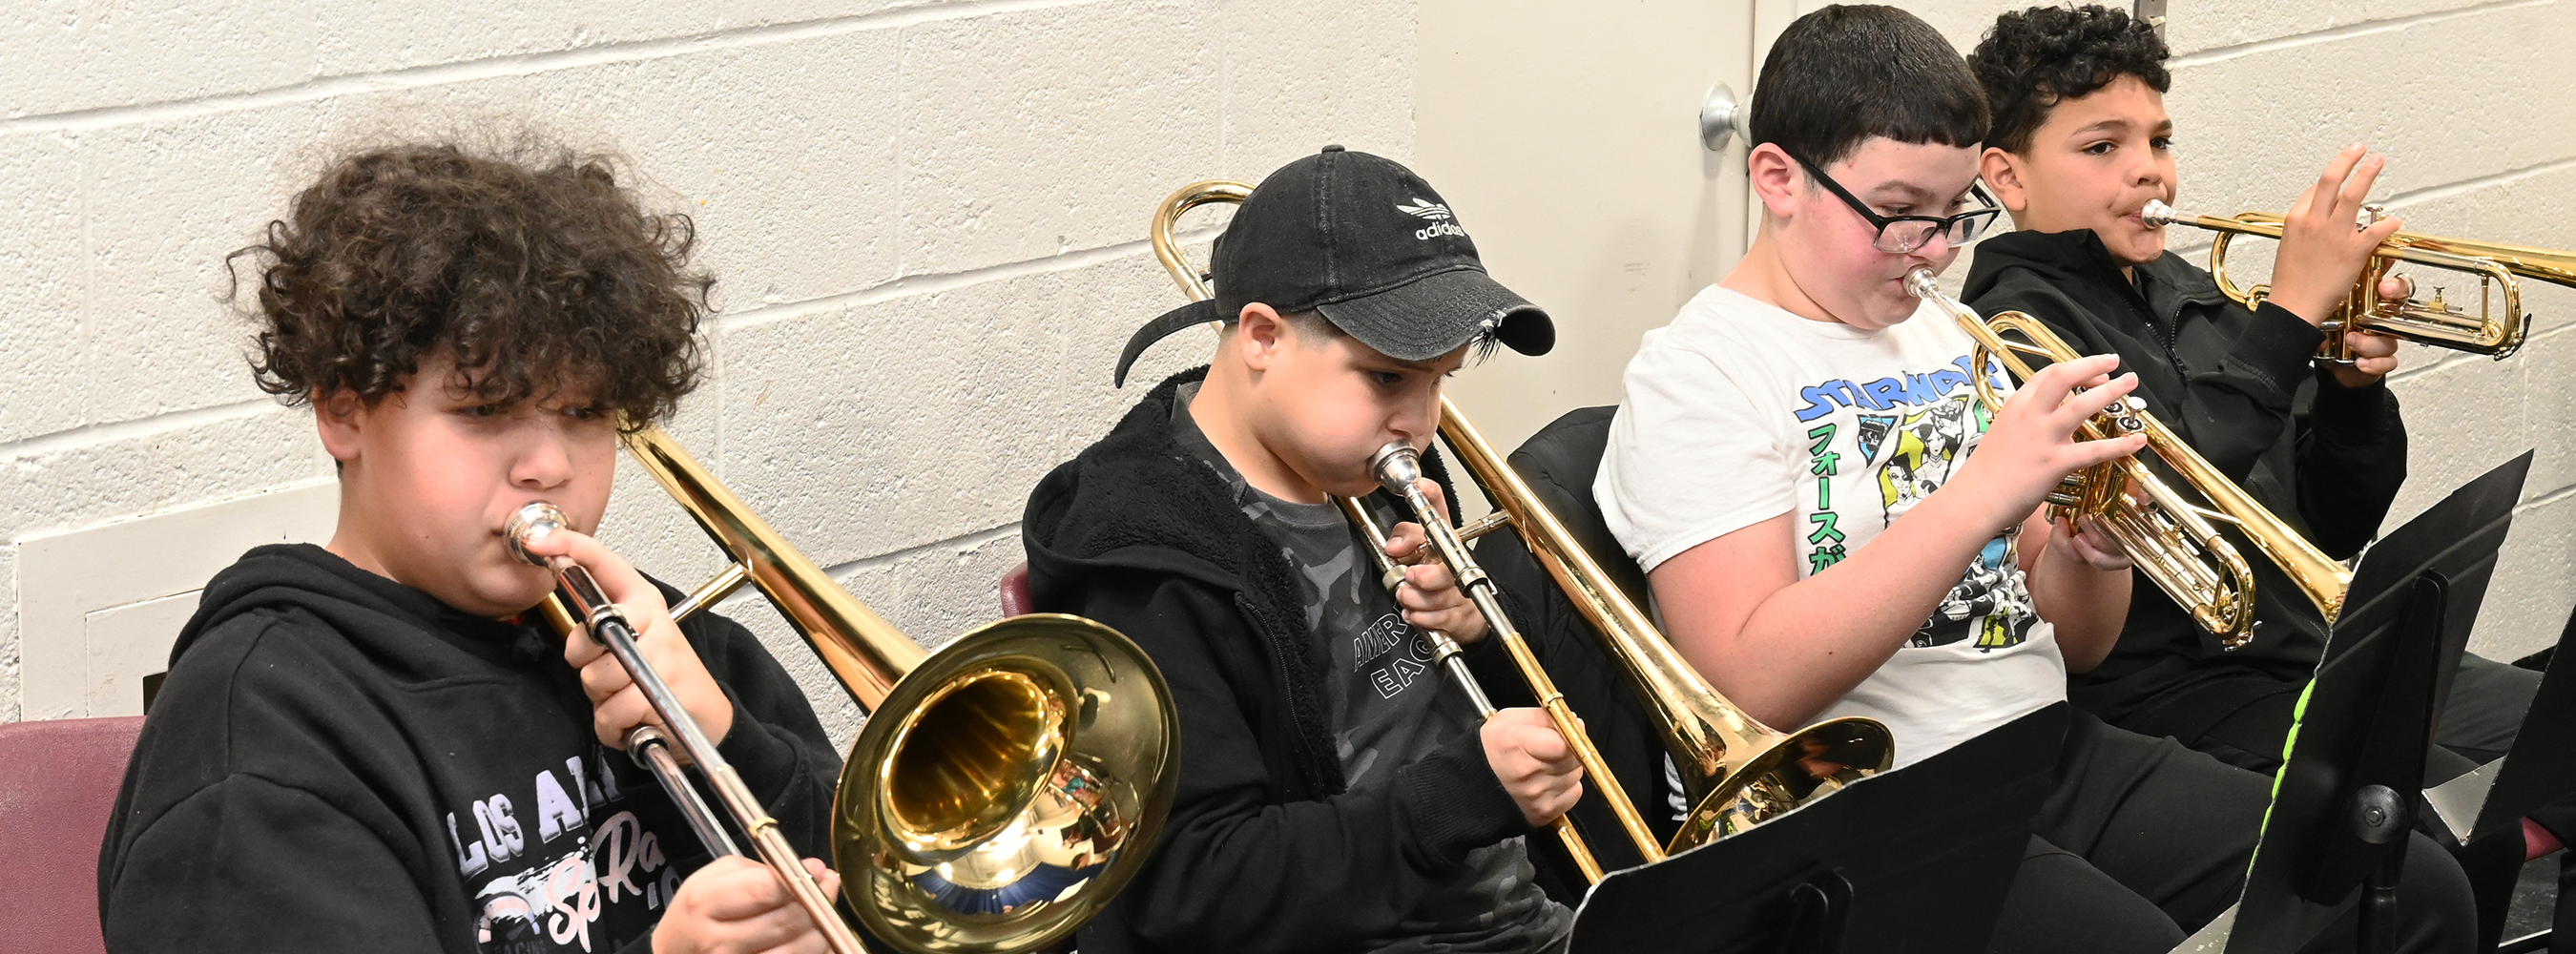 The brass section of the fifth grade band